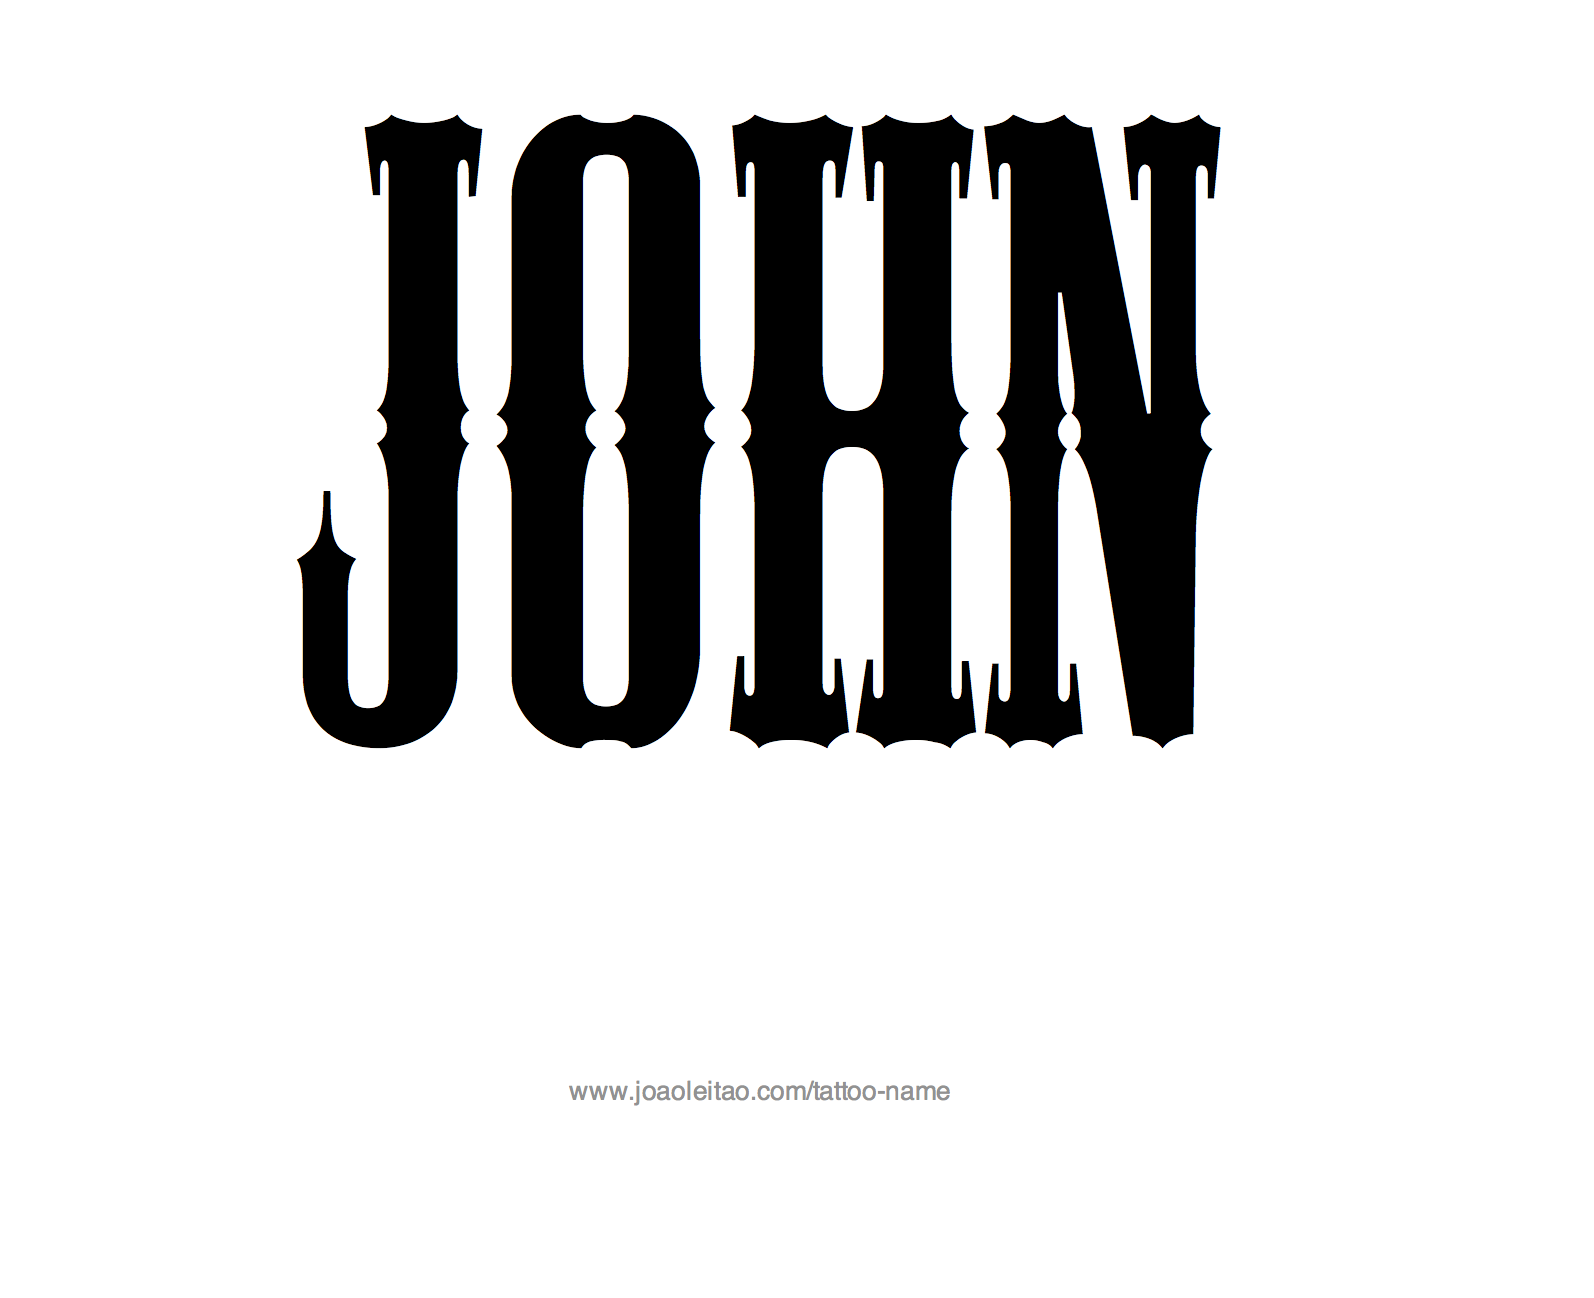 john cage tattoo | This is the score (really) to the composi… | Flickr